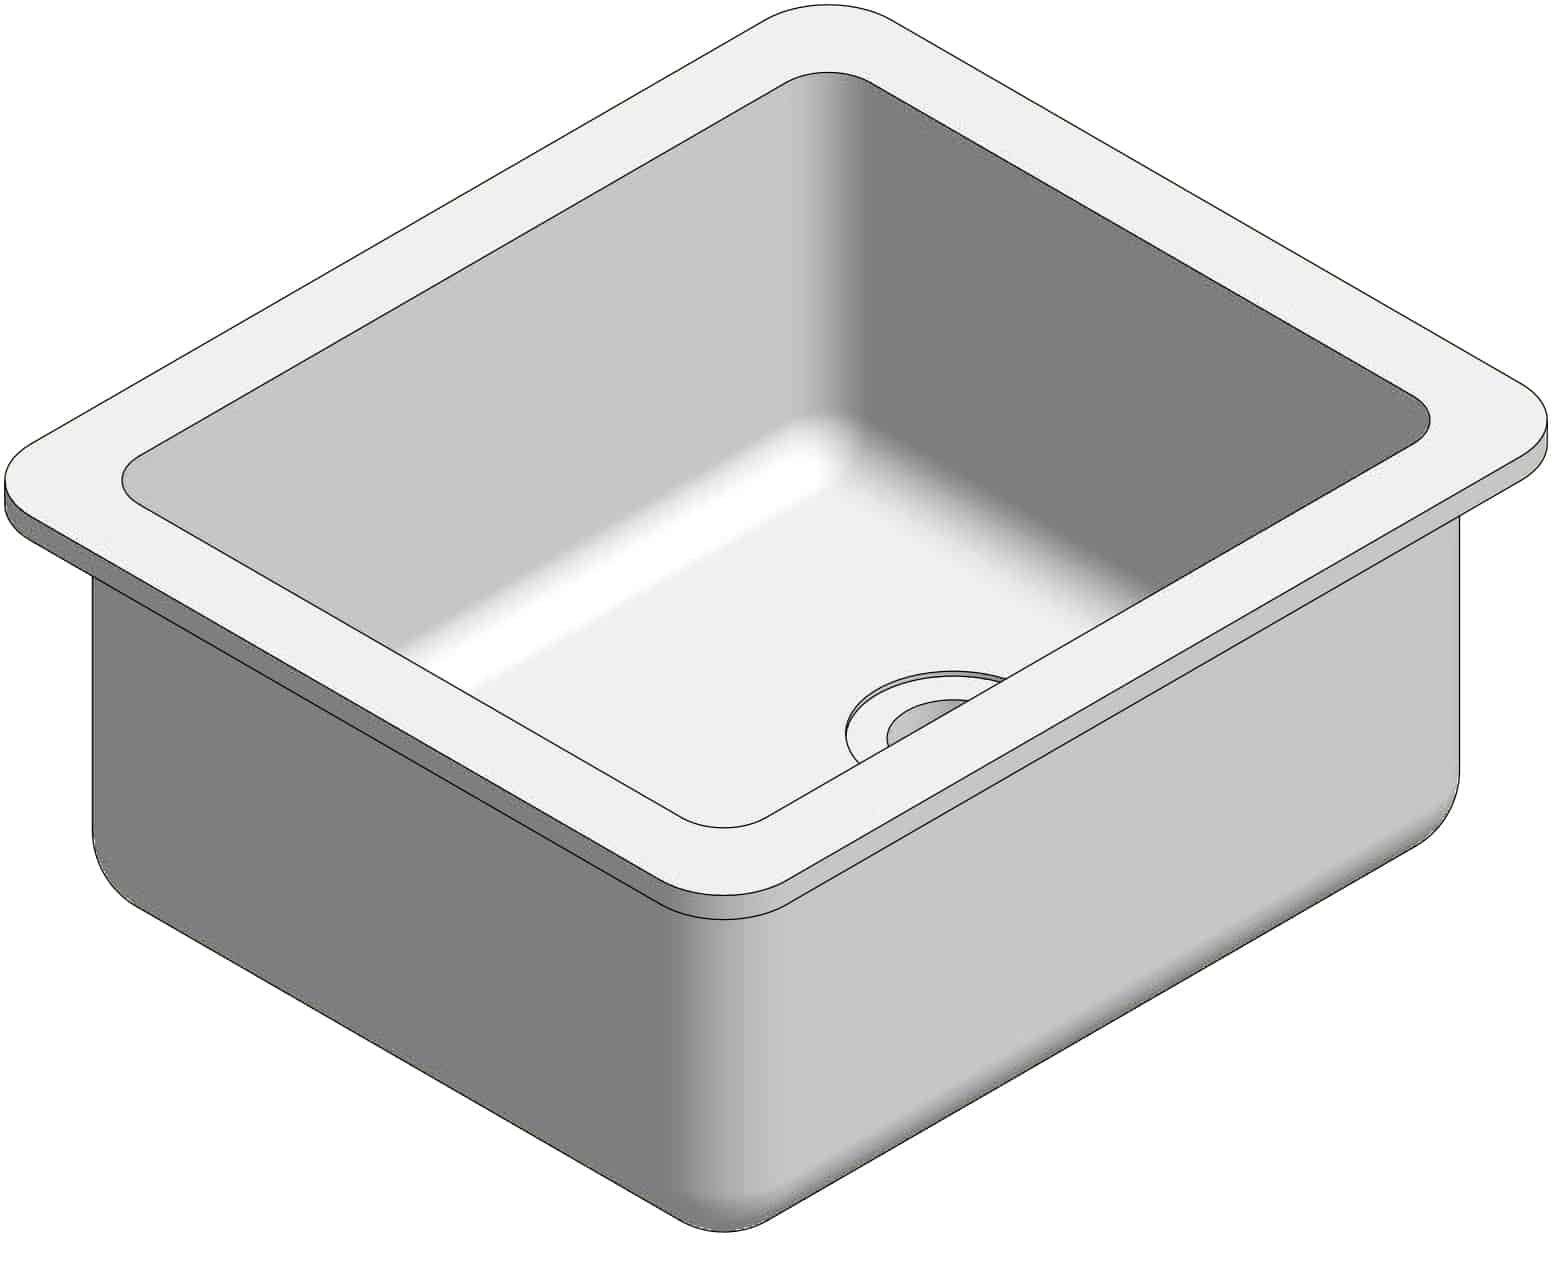 3D visual of epoxy resin sink for commercial science laboratories.